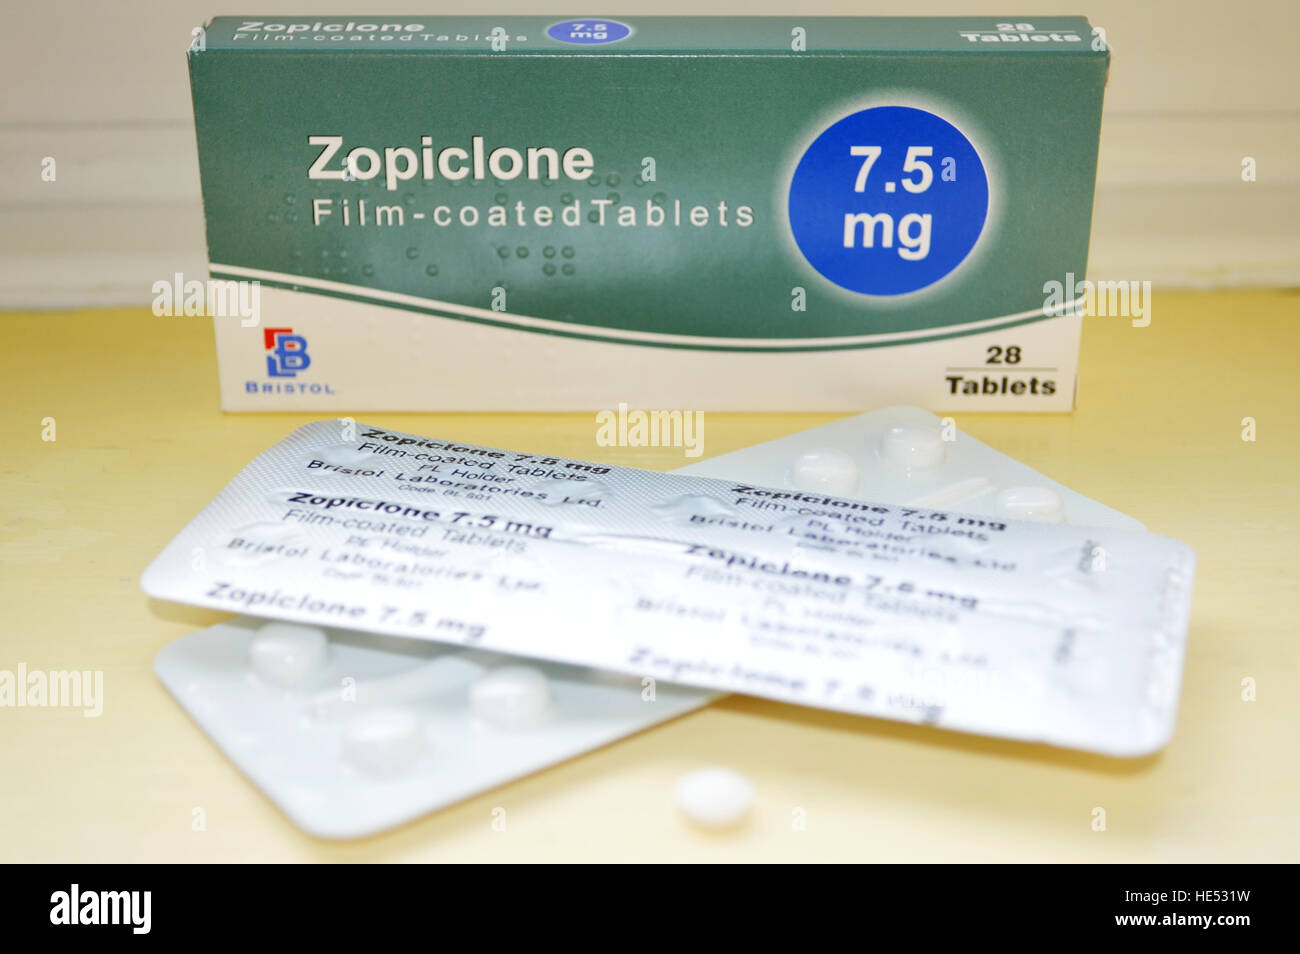 THIS IS A STOCK PHOTO - A pack of Zopiclone prescription sleeping tablets Stock Photo